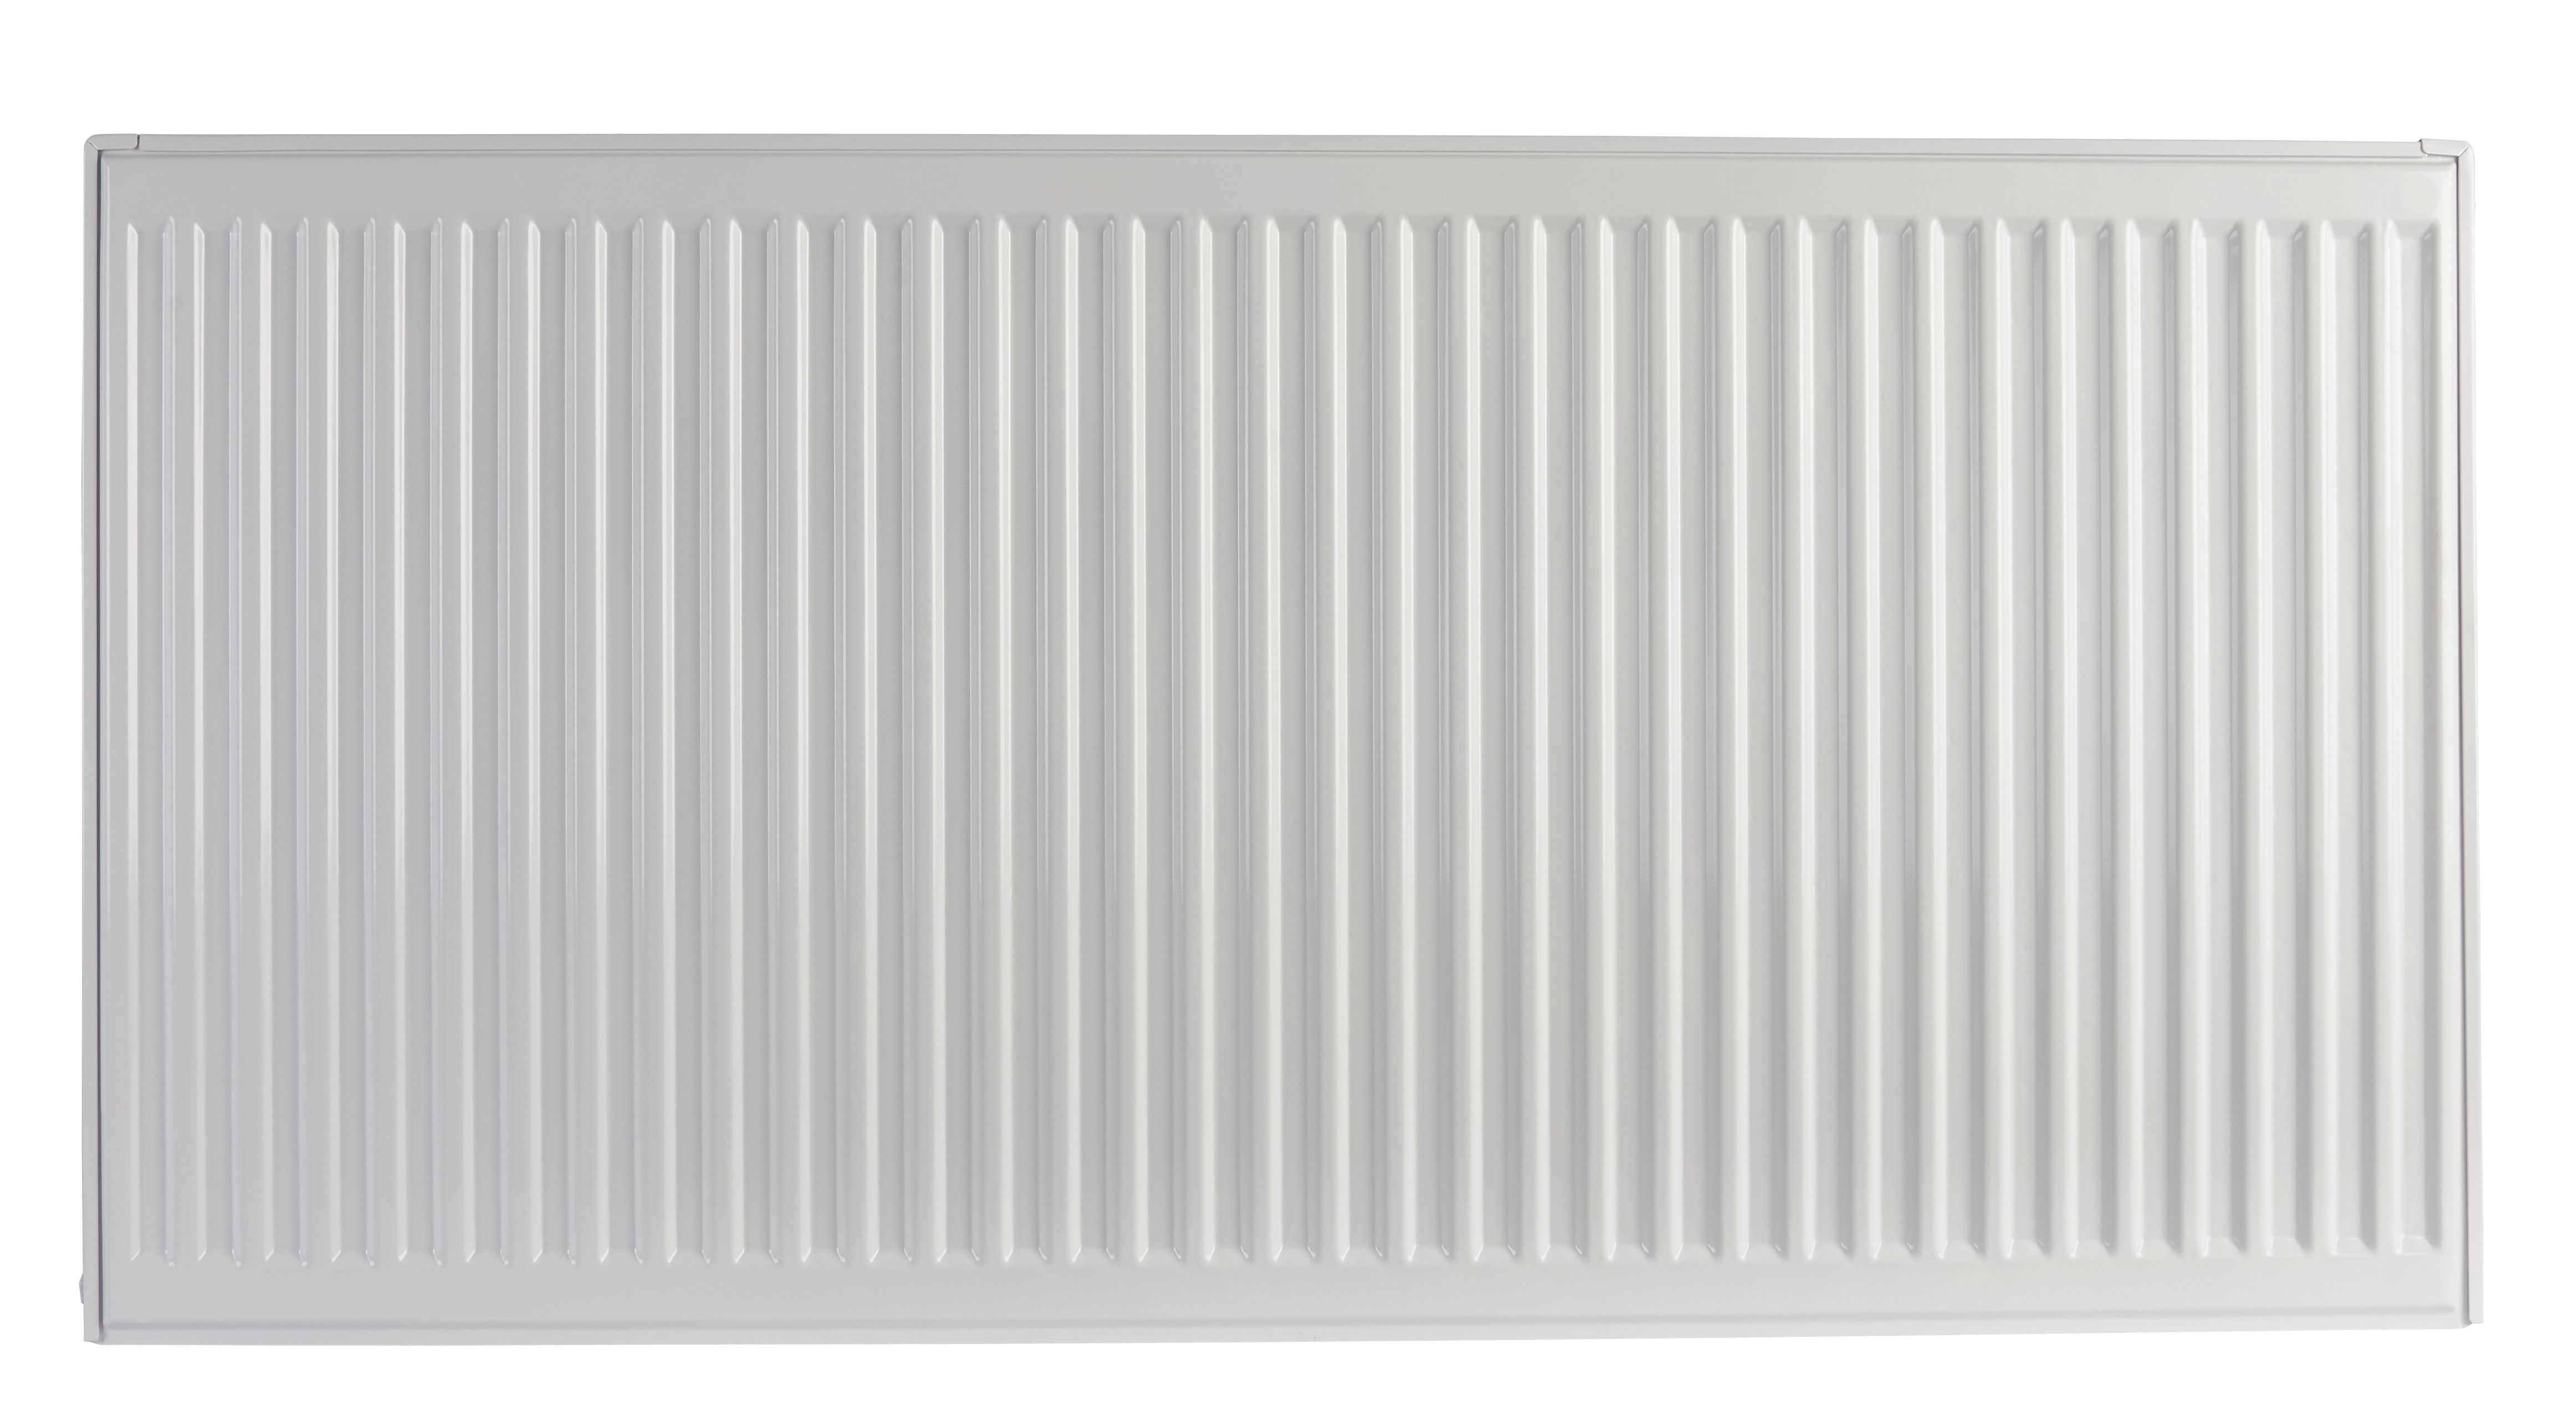 Image of Homeline by Stelrad 600 x 1200mm Type 21 Double Panel Plus Single Convector Radiator